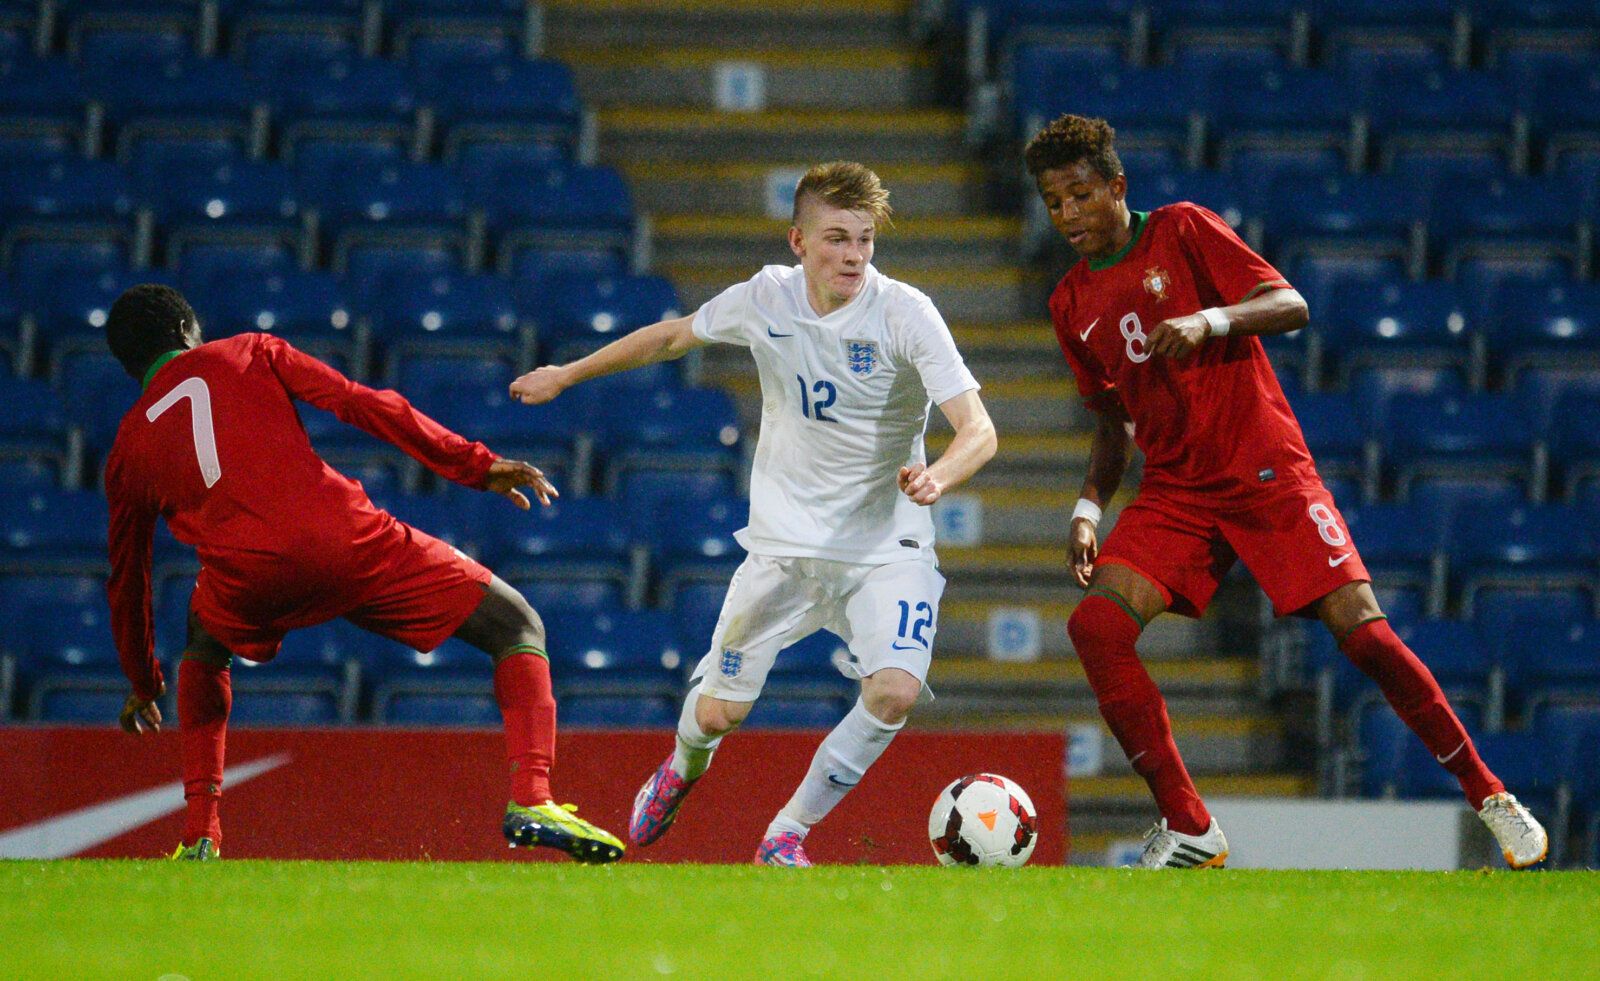 Football - England v Portugal - FA Under 17 International Tournament - Proact Stadium, Chesterfield - 29/8/14 
England's Hayden Coulson in action against Gedson - Portugal  
Mandatory Credit: Action Images / Paul Currie 
EDITORIAL USE ONLY.